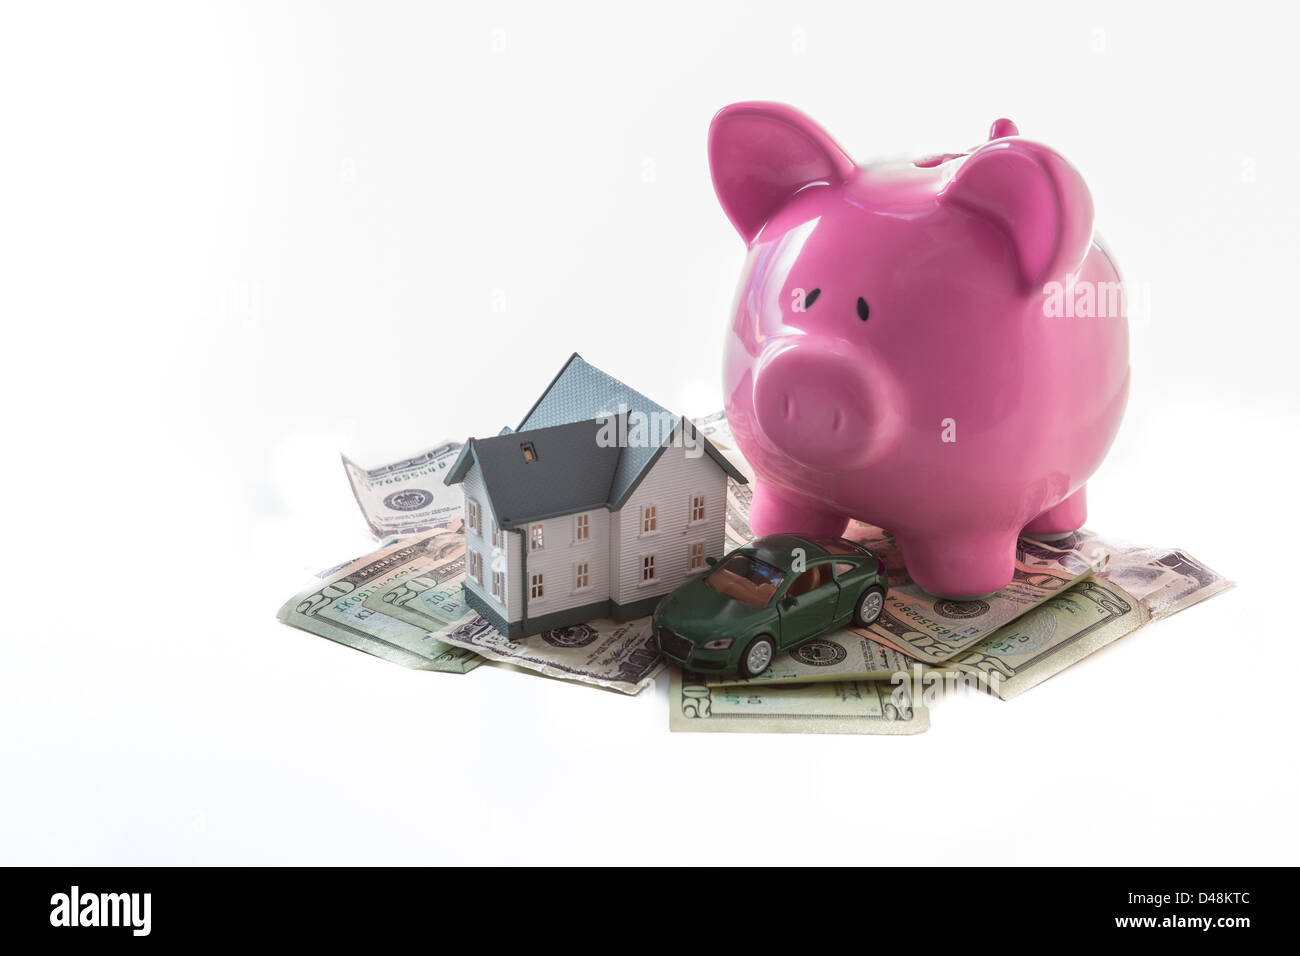 Piggy bank toy car and miniature home resting on pile of dollars Stock Photo